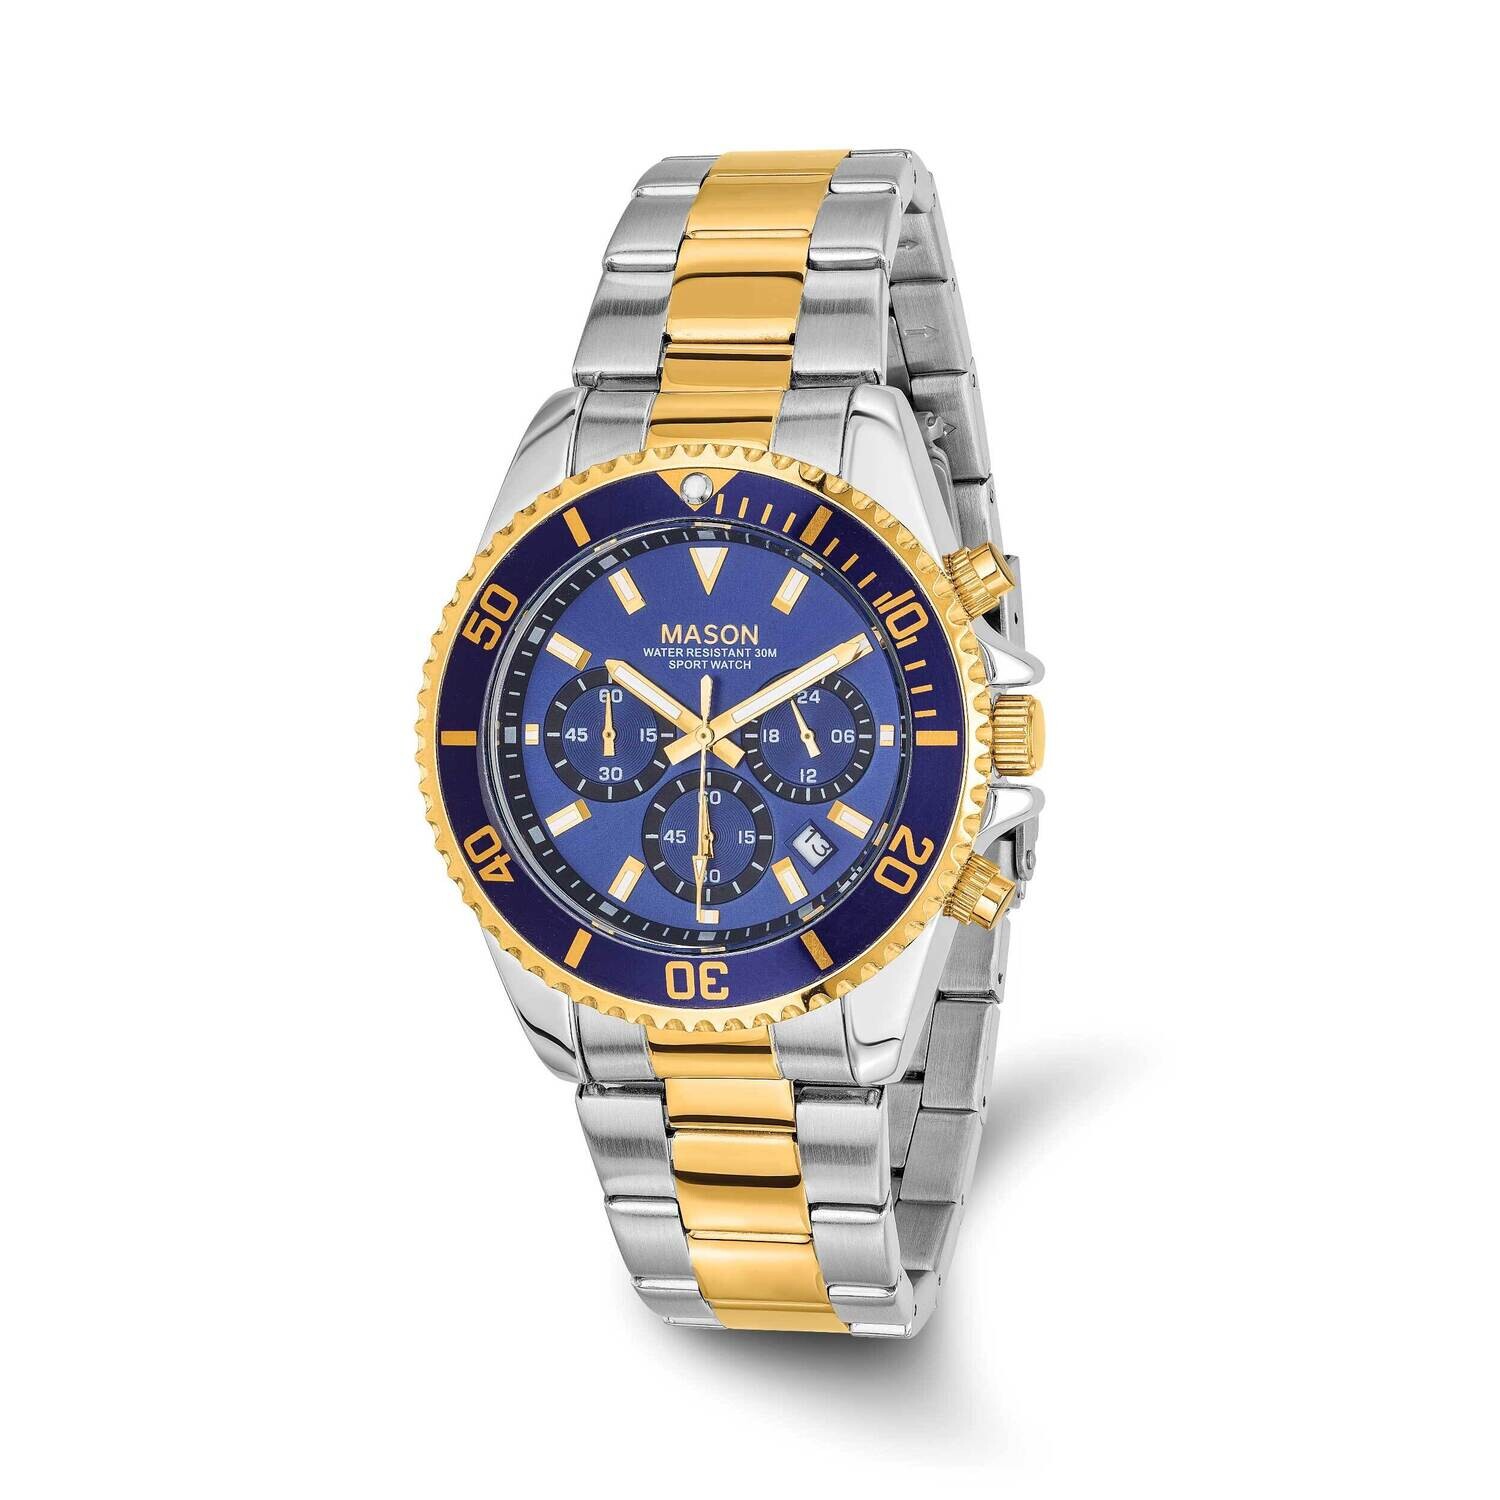 Mason Sales Two-Tone Gold-Plated Chronograph Blue Dial Watc Stainless Steel XWA6512